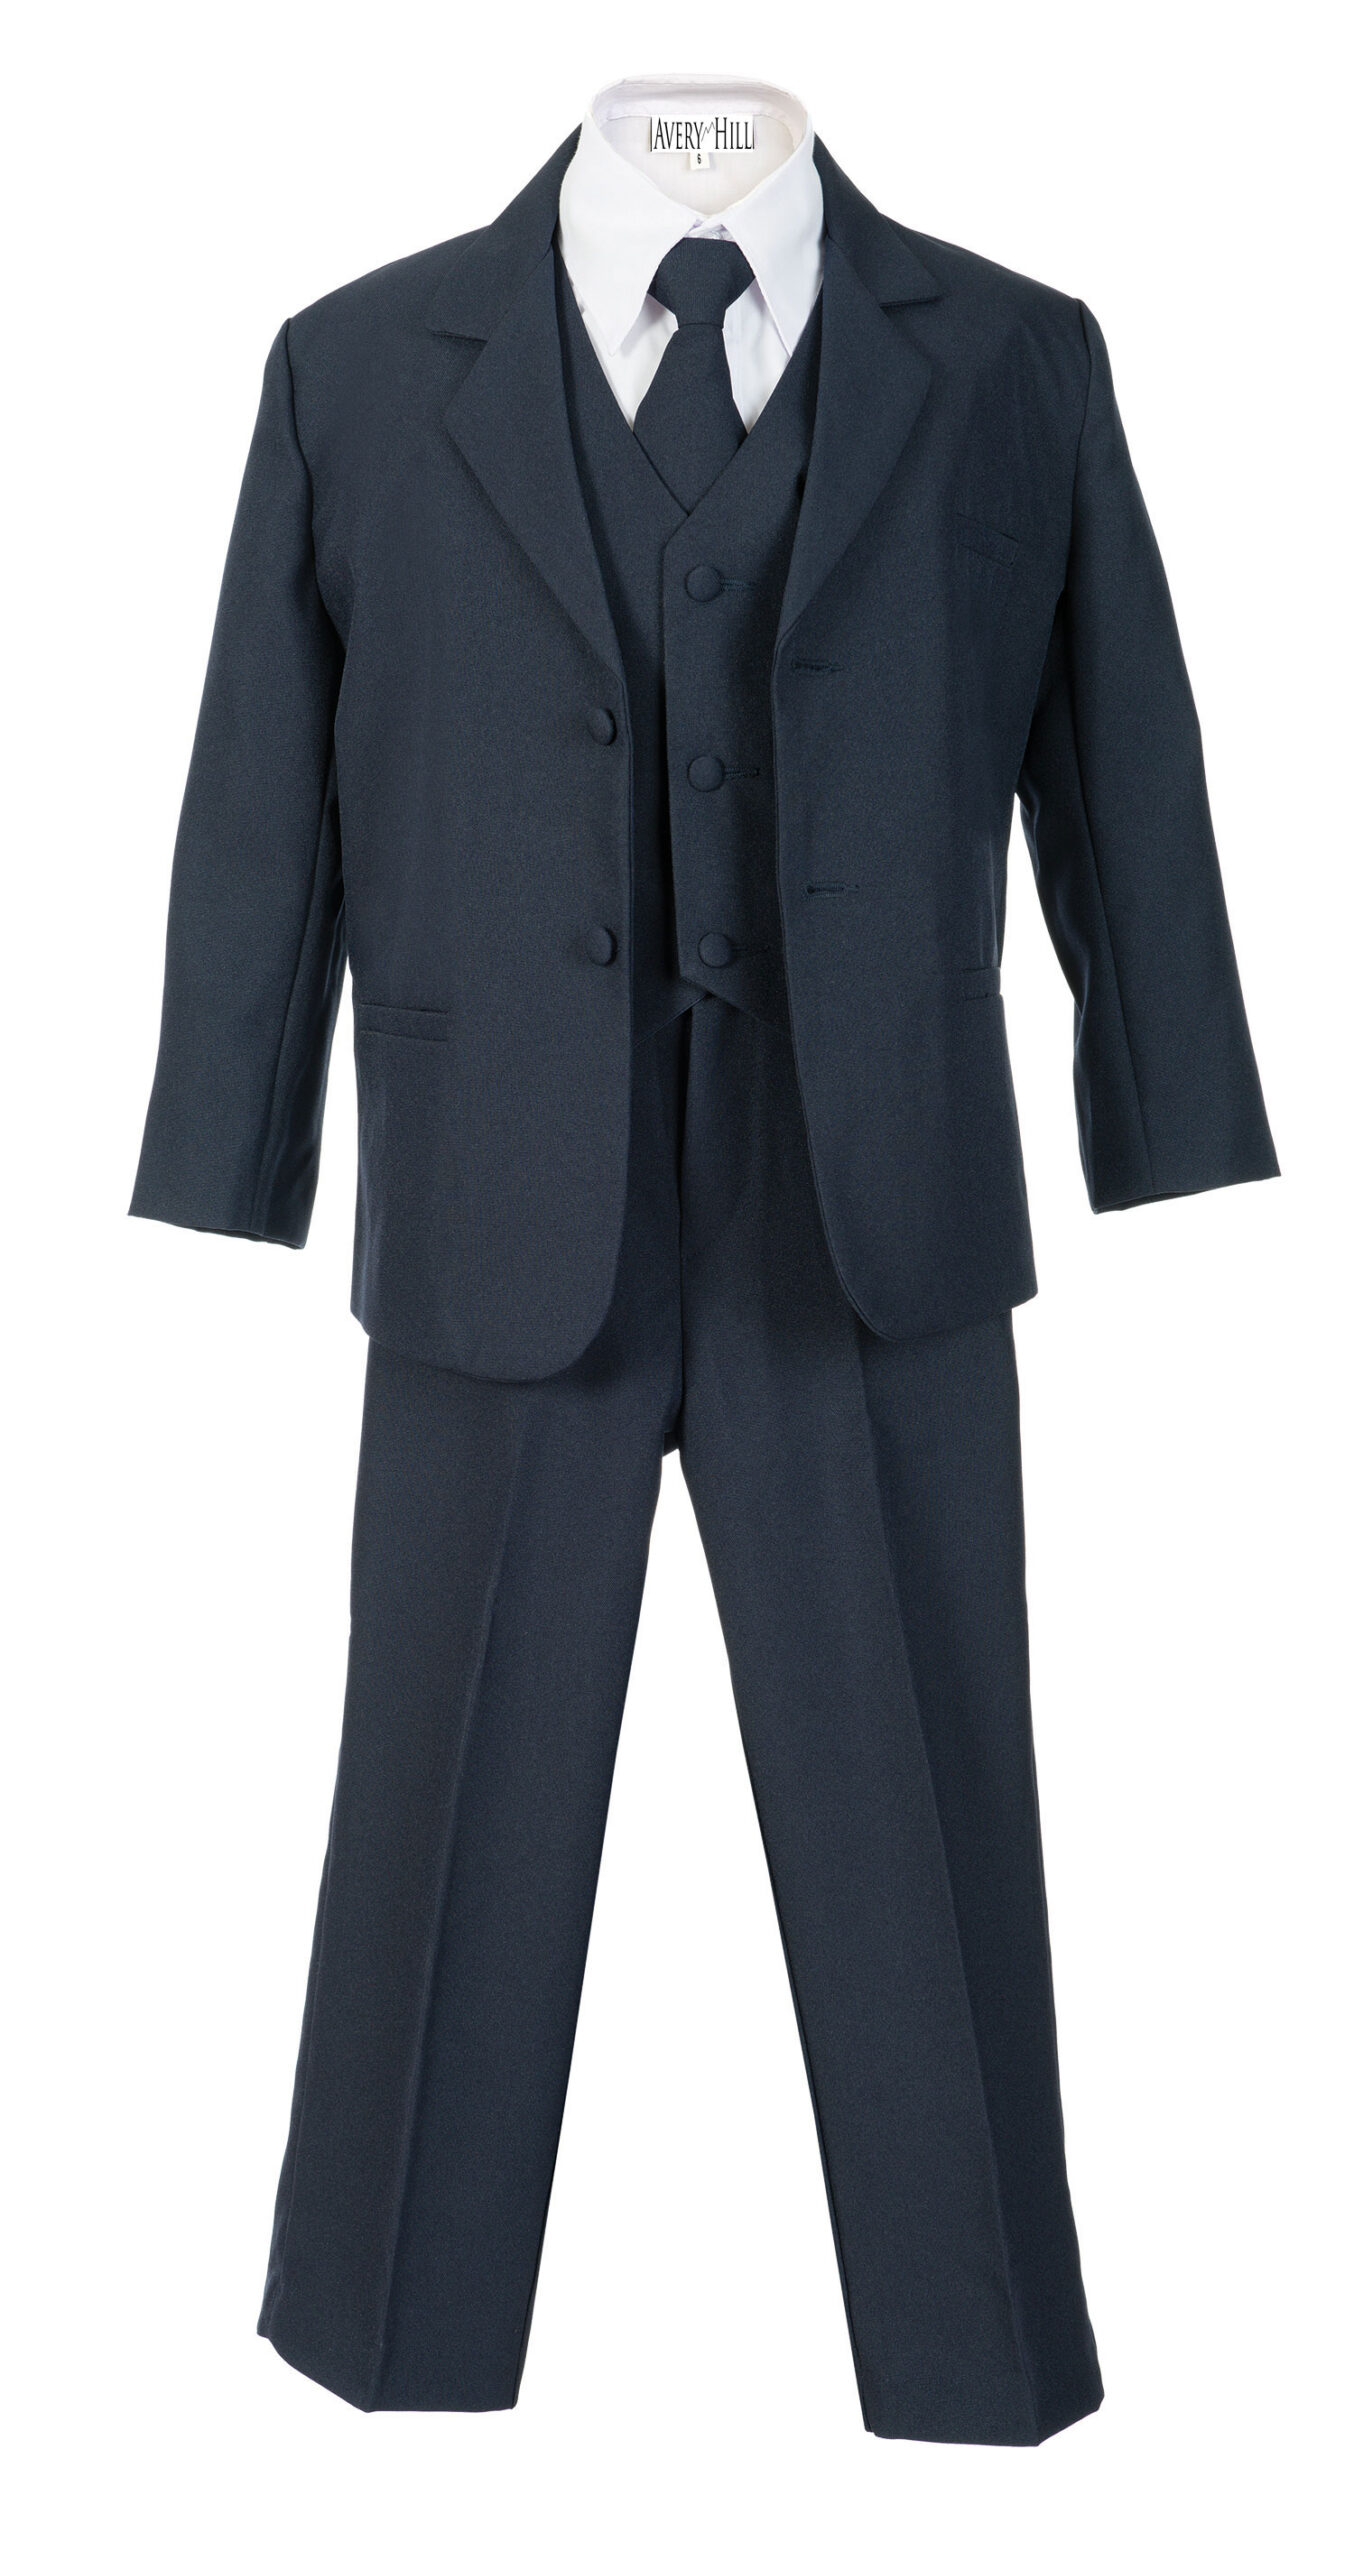 Avery Hill Boys Formal 5 Piece Suit with Shirt and Vest Navy - 10